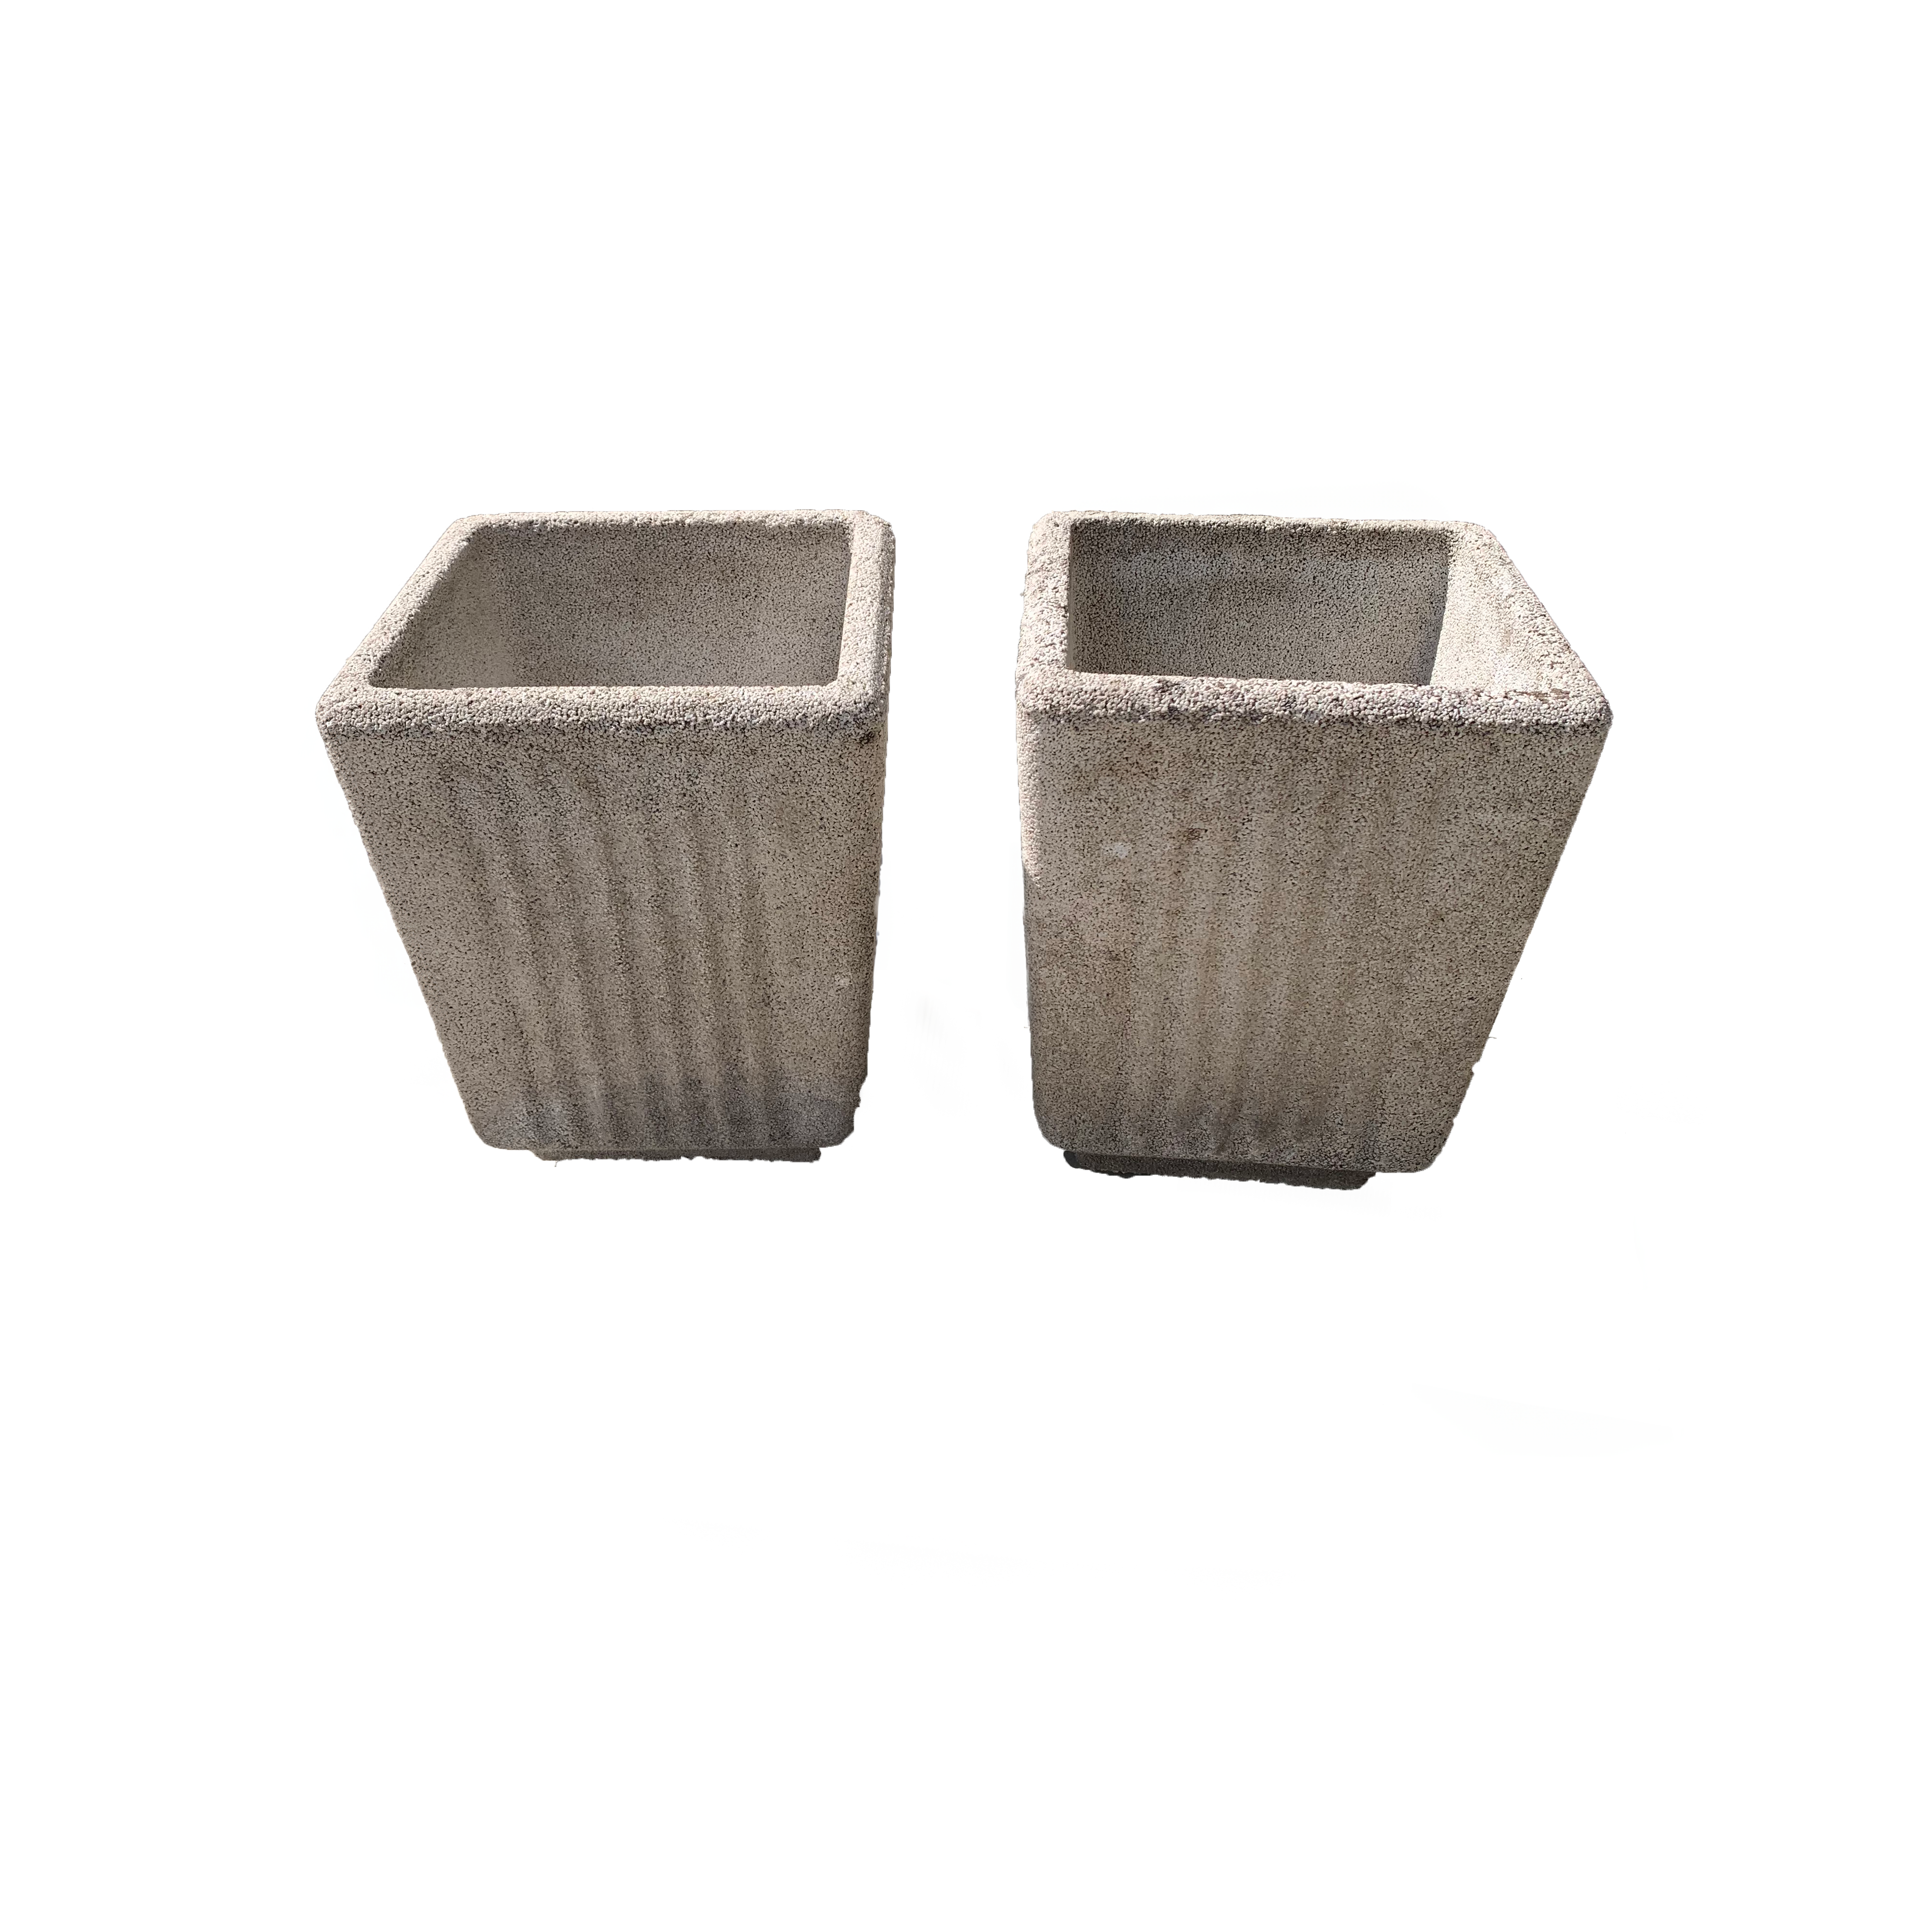 French Cast Stone Planters - Pair